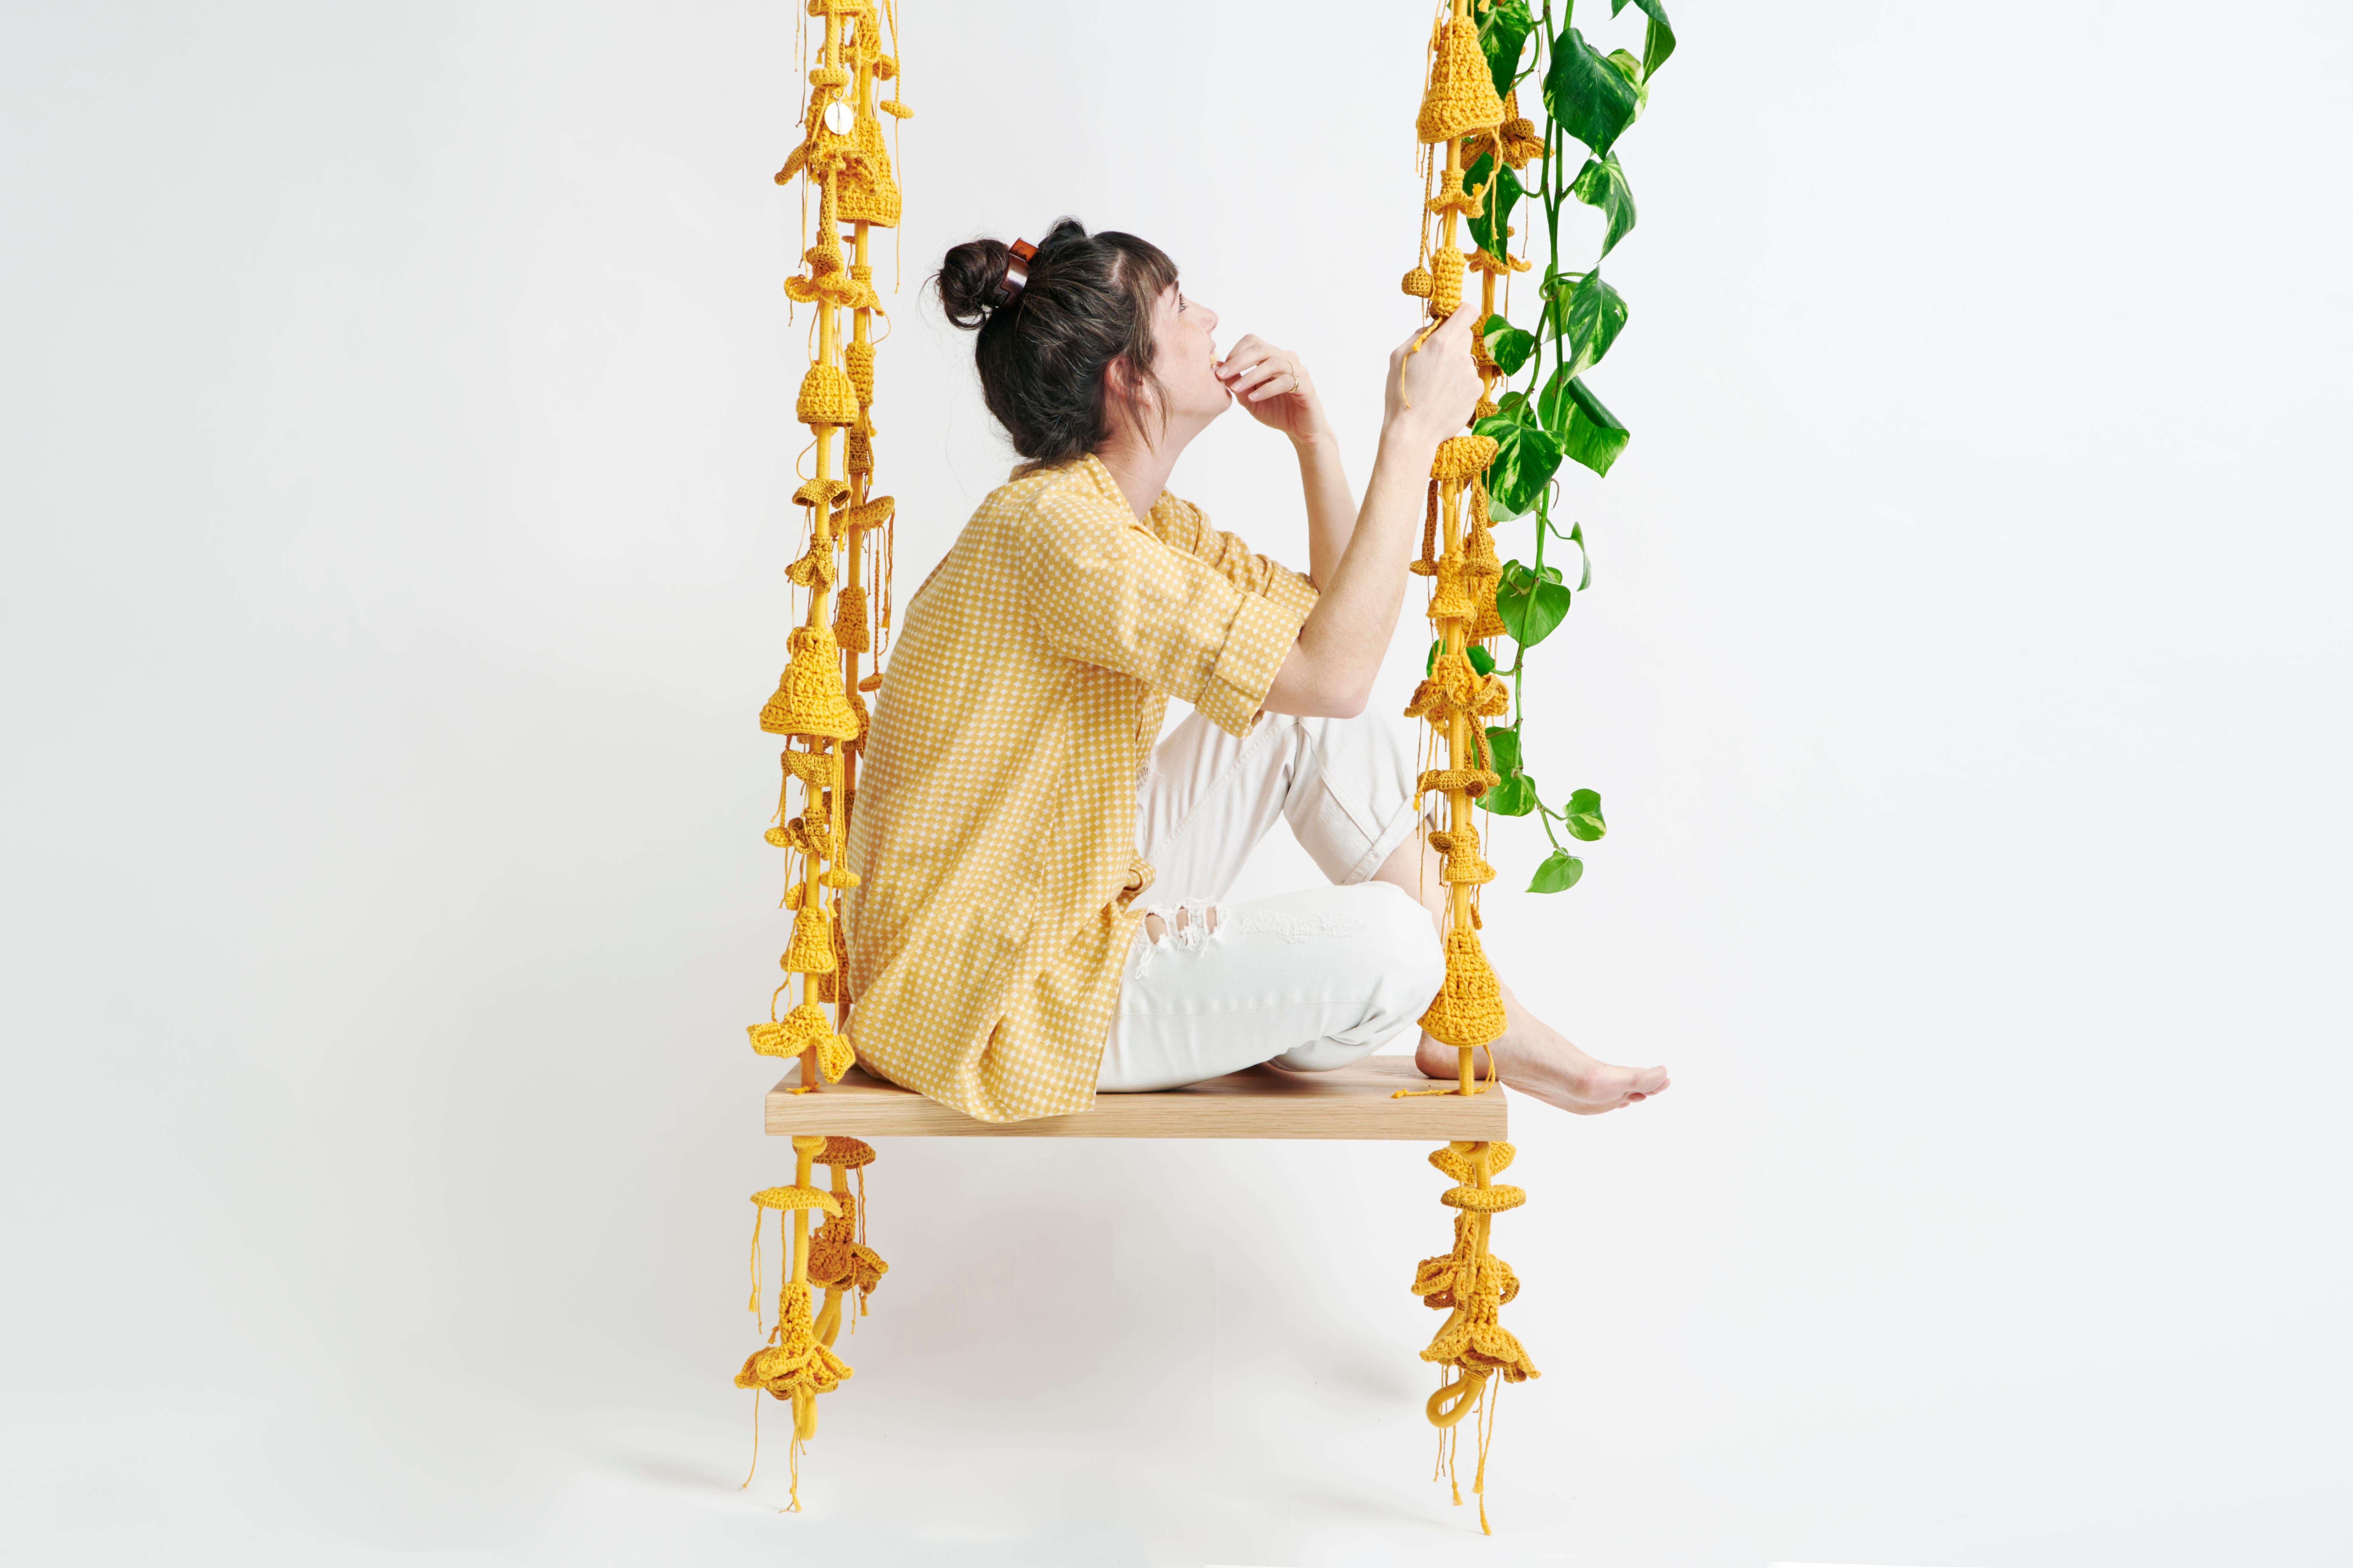 Iota swings take the user to a wild, natural, fantastic place. These swings work great in living rooms, spacious bedrooms or hotel lobbies and suites. They are an elegant yet bold choice for both modern-Minimalist and boho interiors. Nearly 200